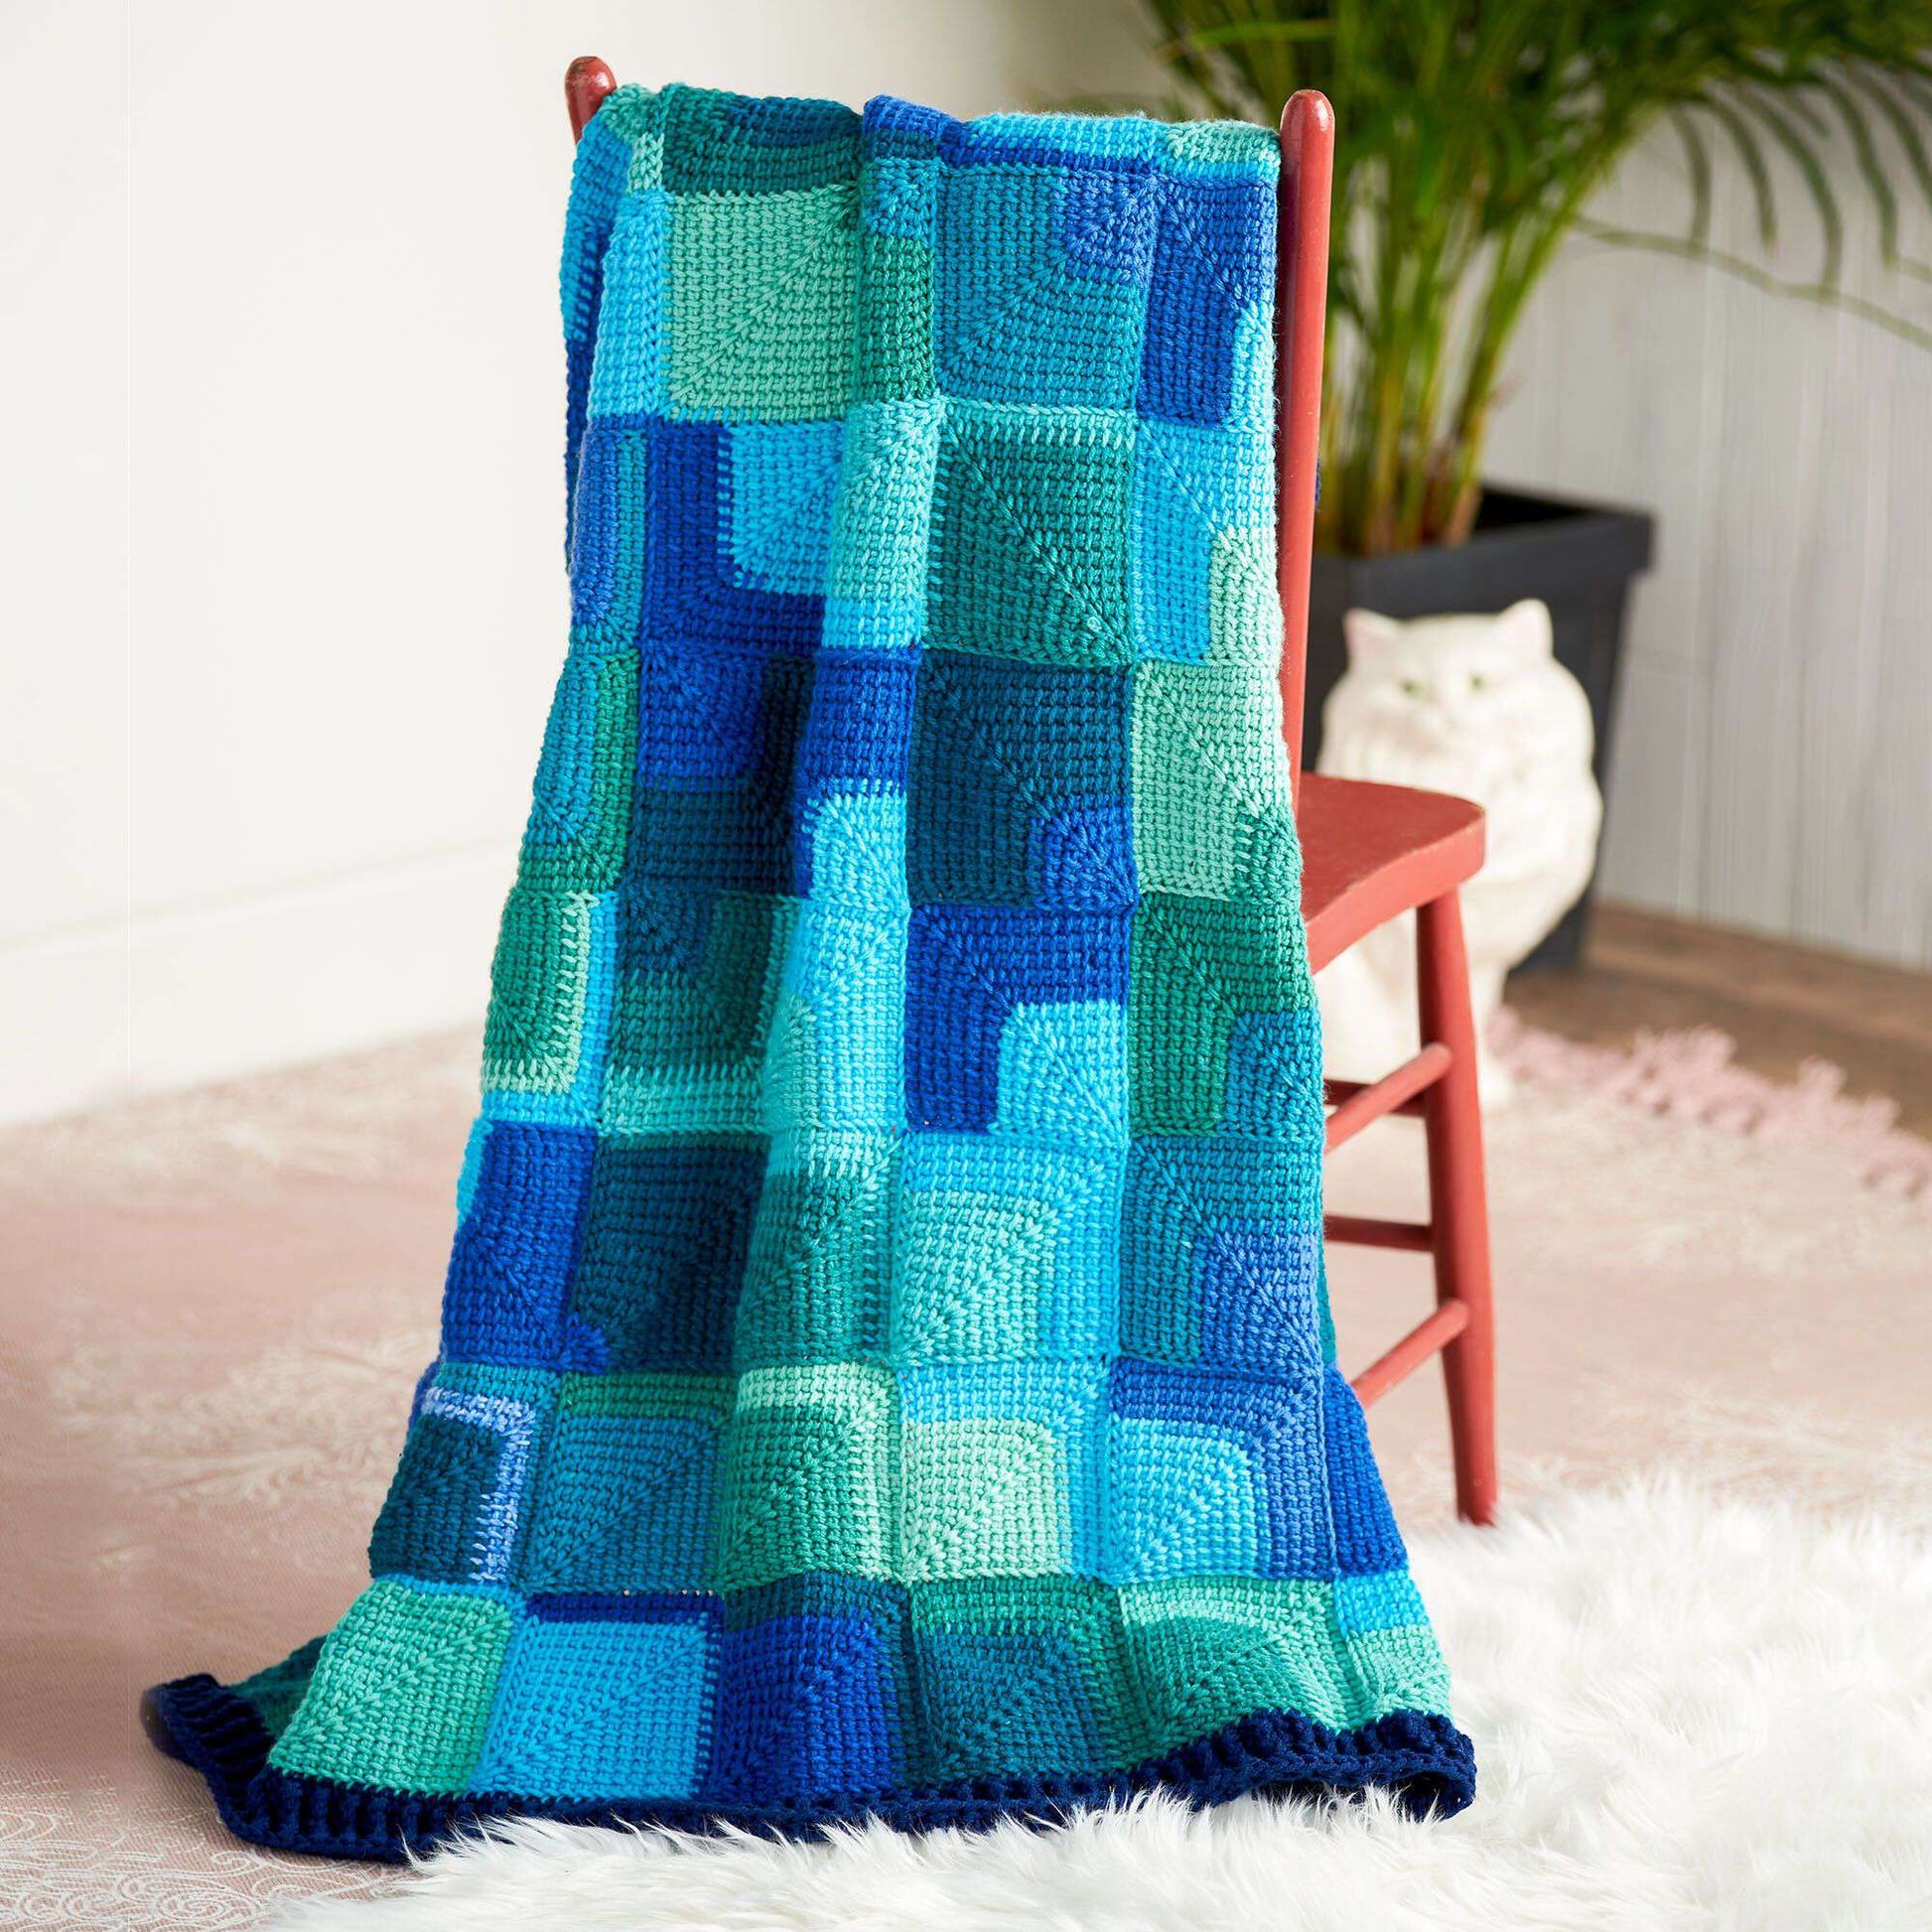 Free Red Heart Crochet Modern Squares Throw Pattern